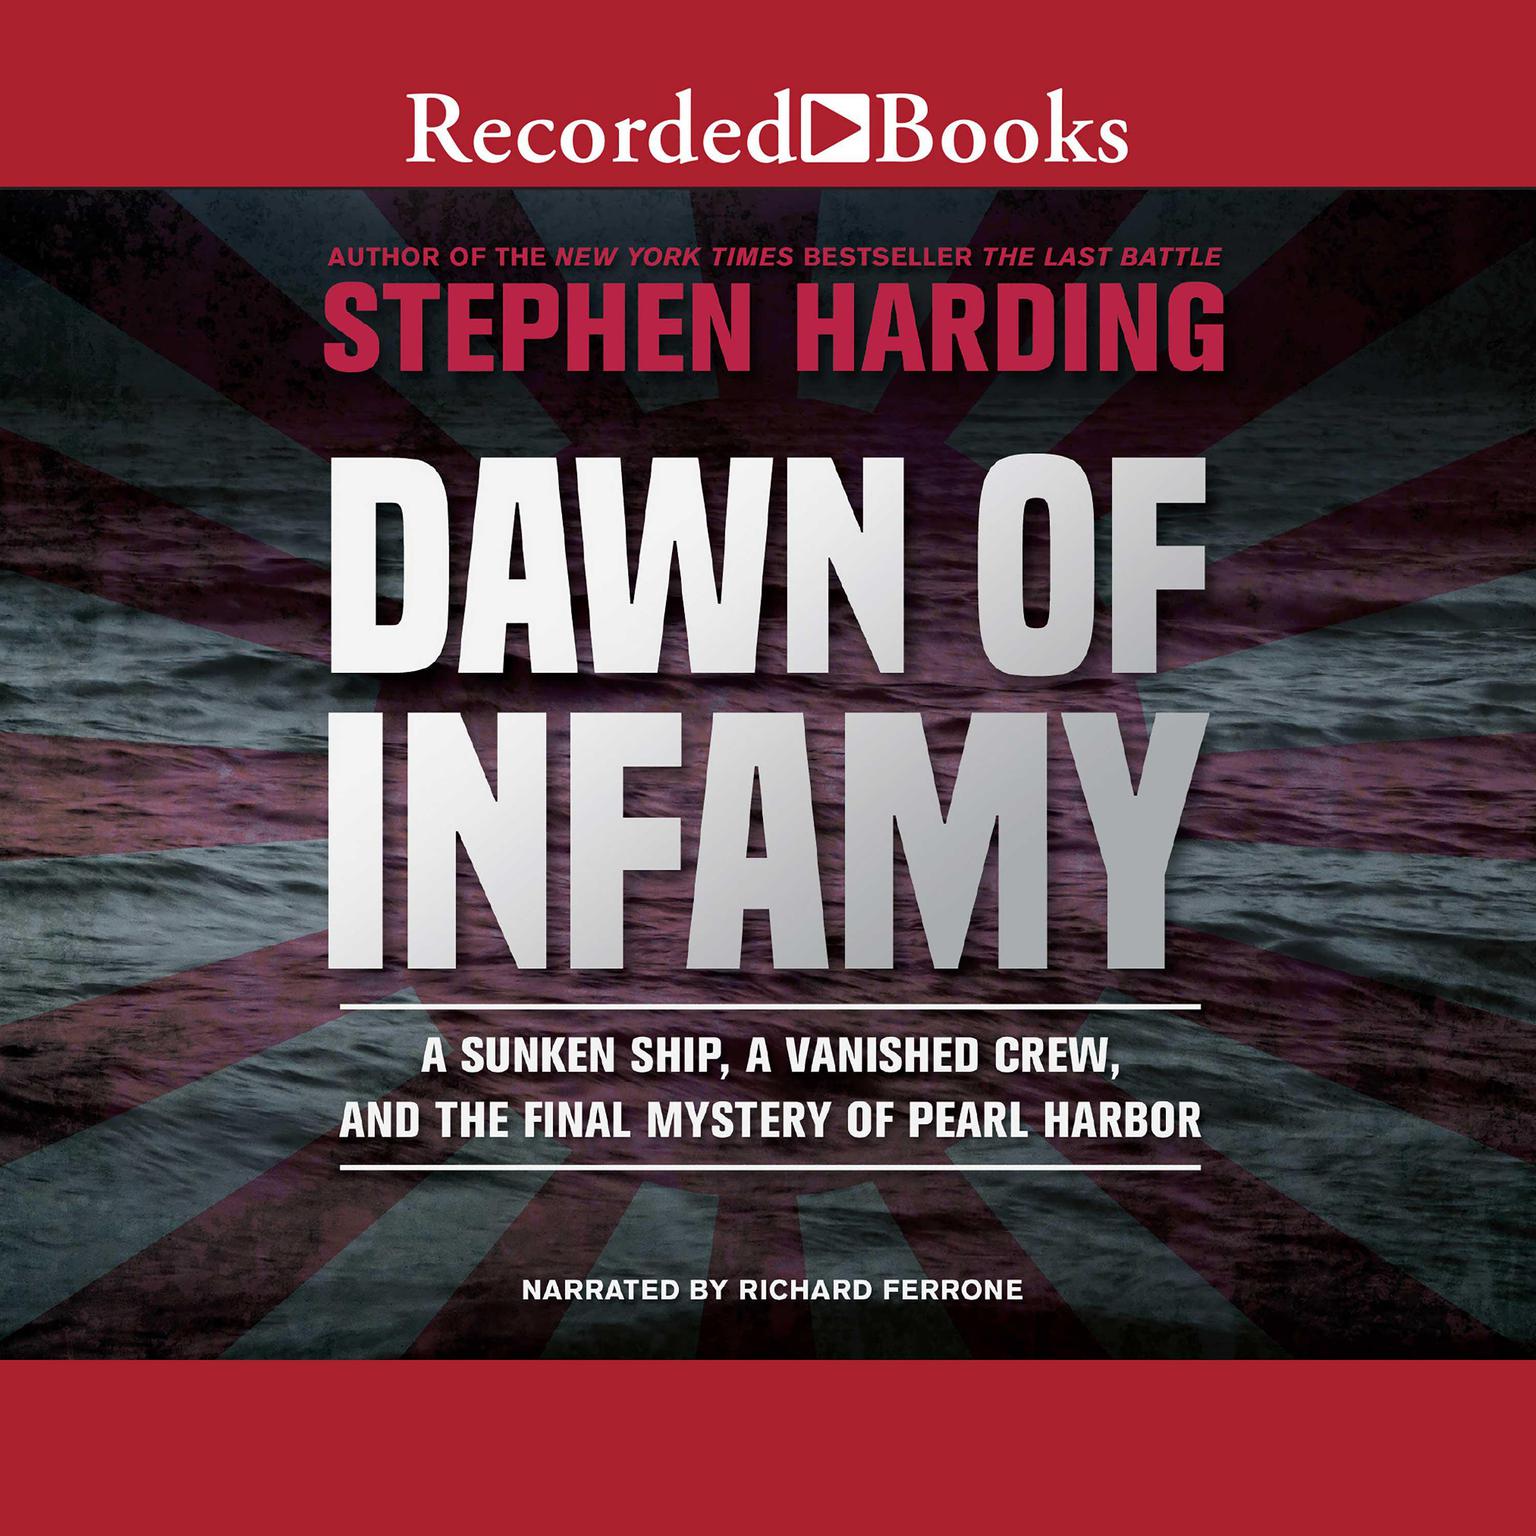 Dawn of Infamy: A Sunken Ship, a Vanished Crew, and the Final Mystery of Pearl Harbor Audiobook, by Stephen Harding